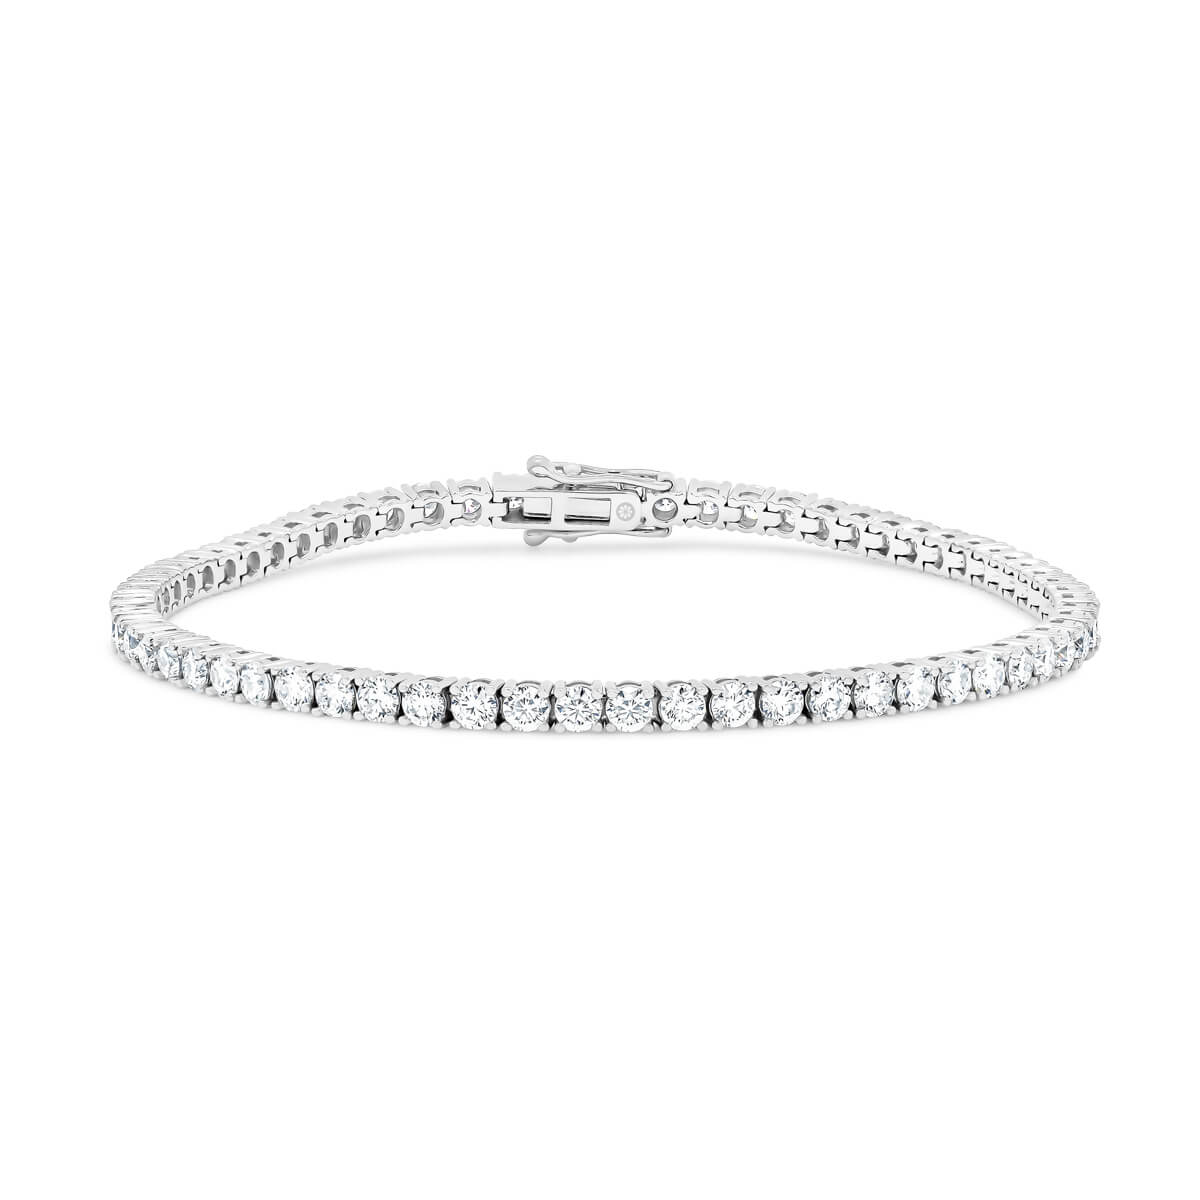 Mikayla 2.5 Lgd Timeless 4-Prong Tennis Bracelet In 18K Gold With Safety Clasp